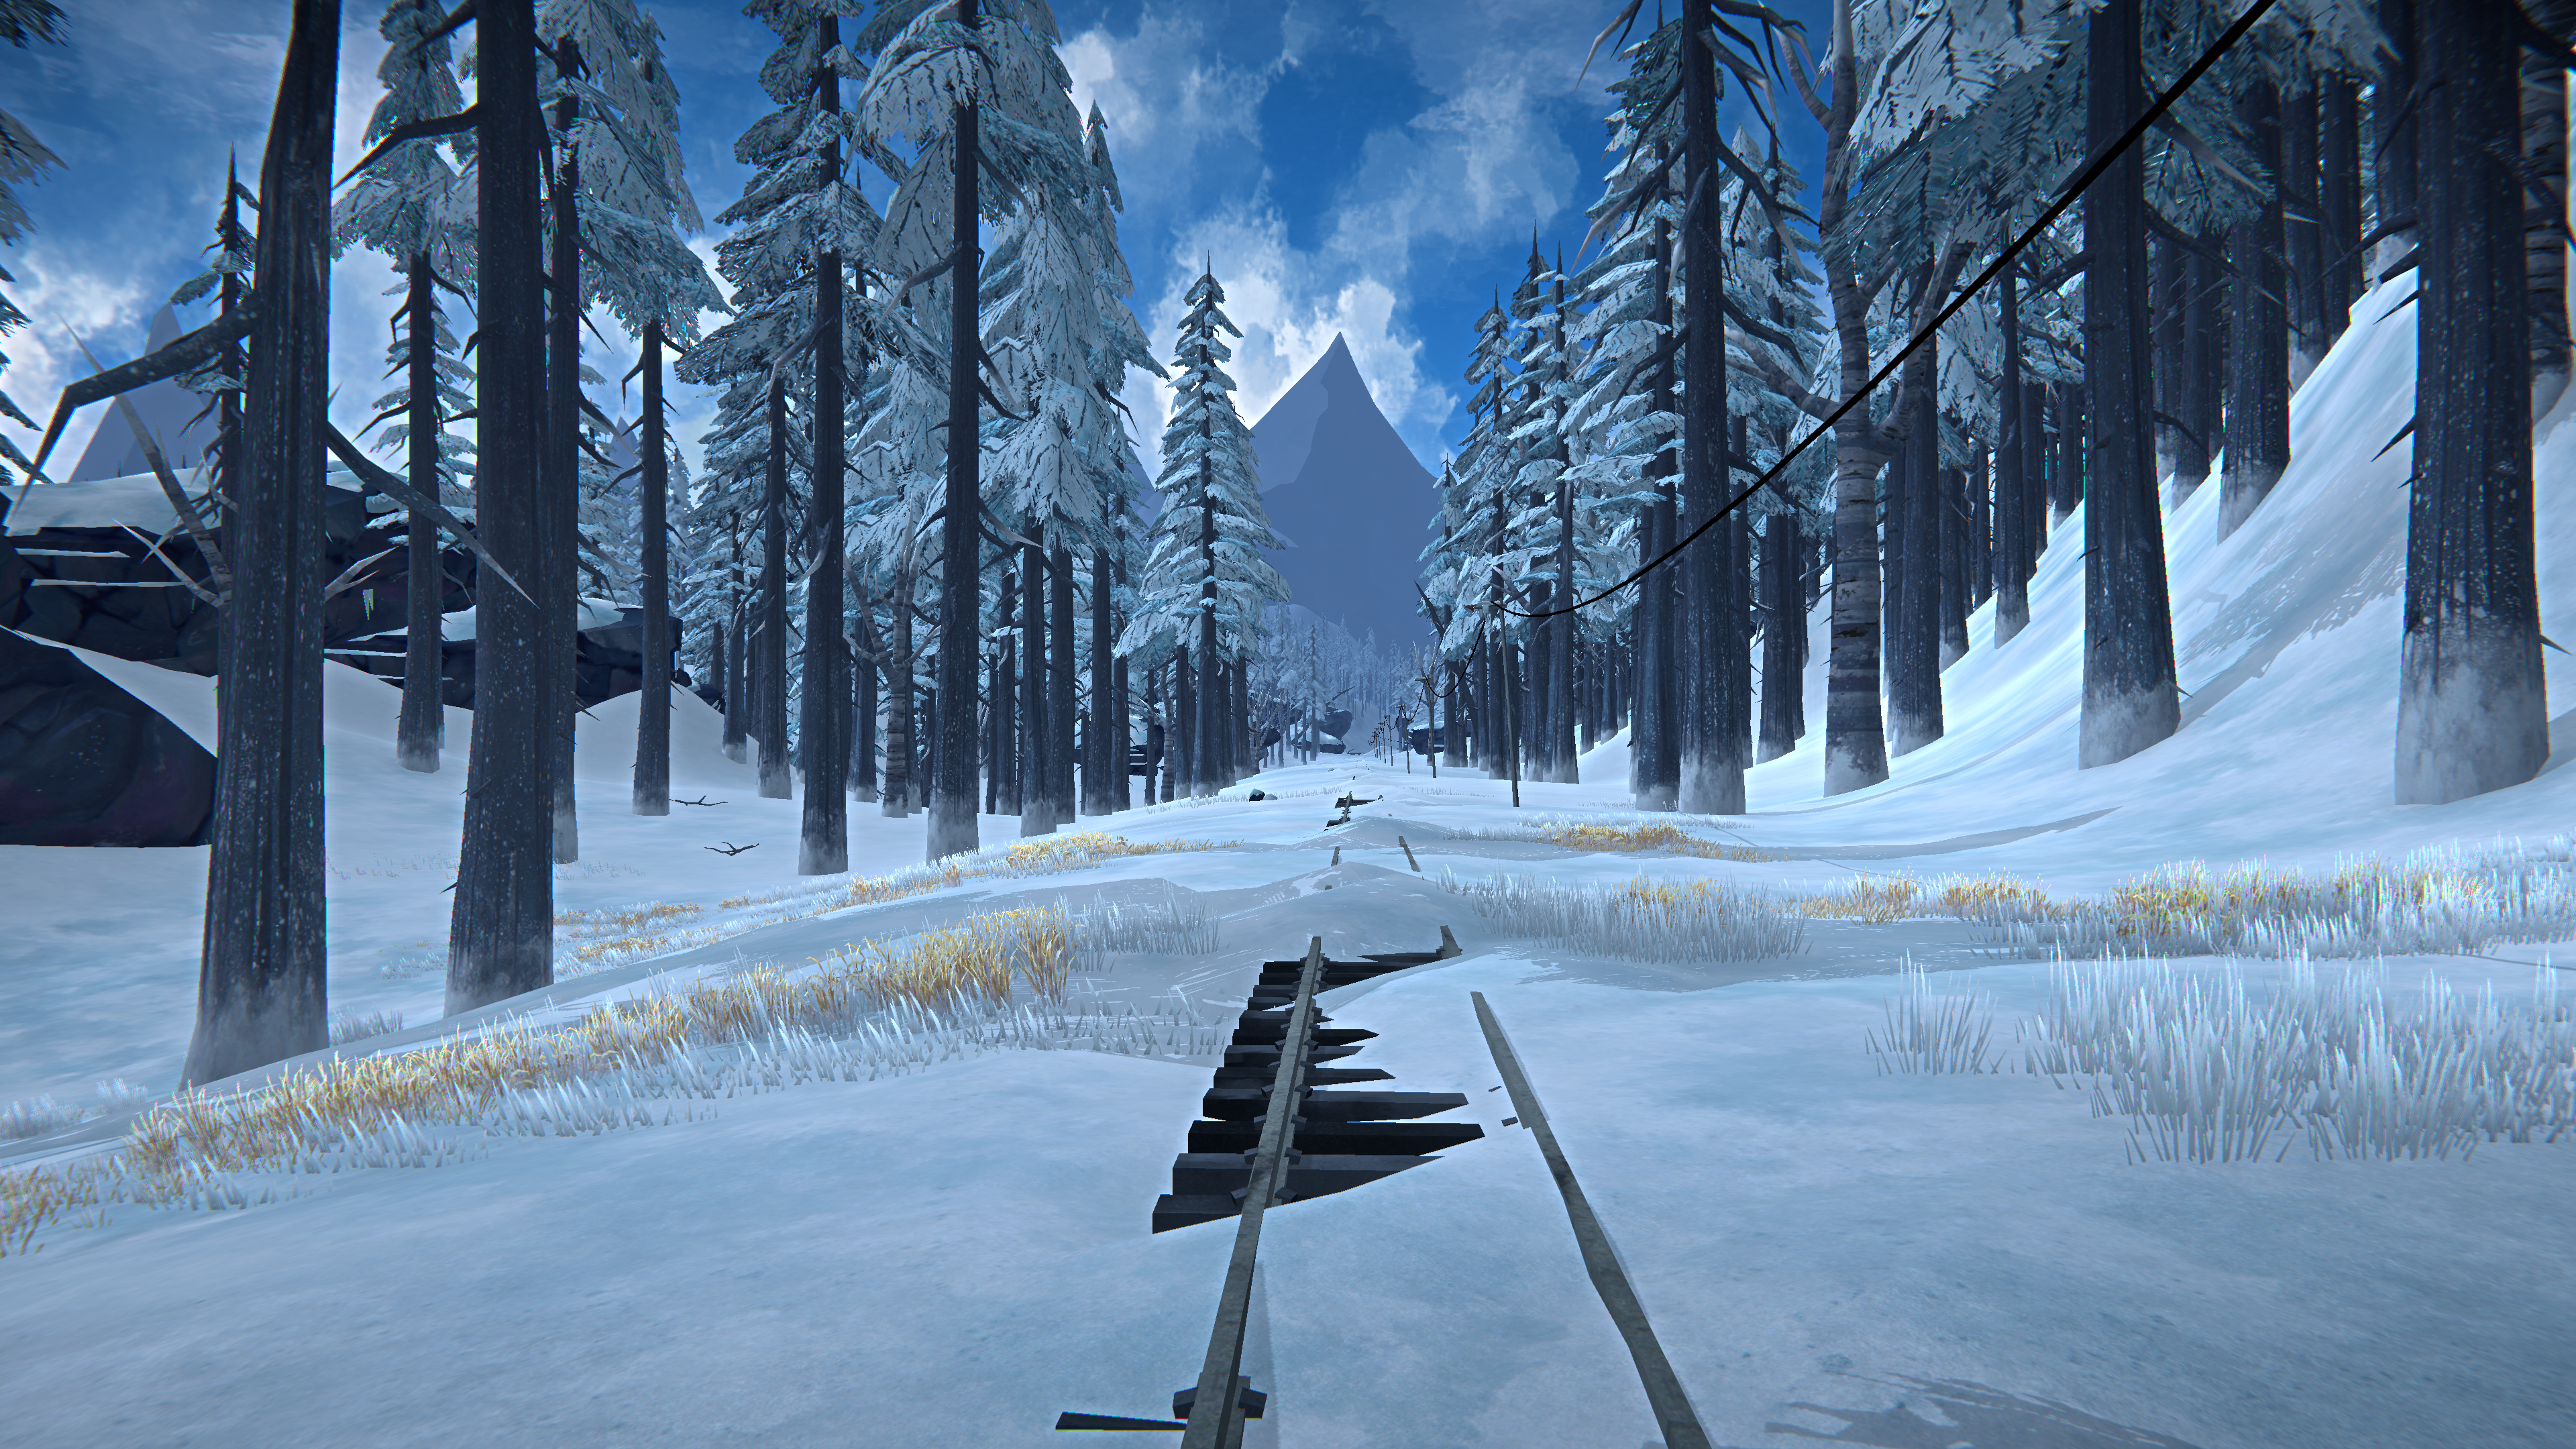 Video Game Landscape Video Games Screen Shot The Long Dark Snow PC Gaming Survival Video Game Art 3840x2160